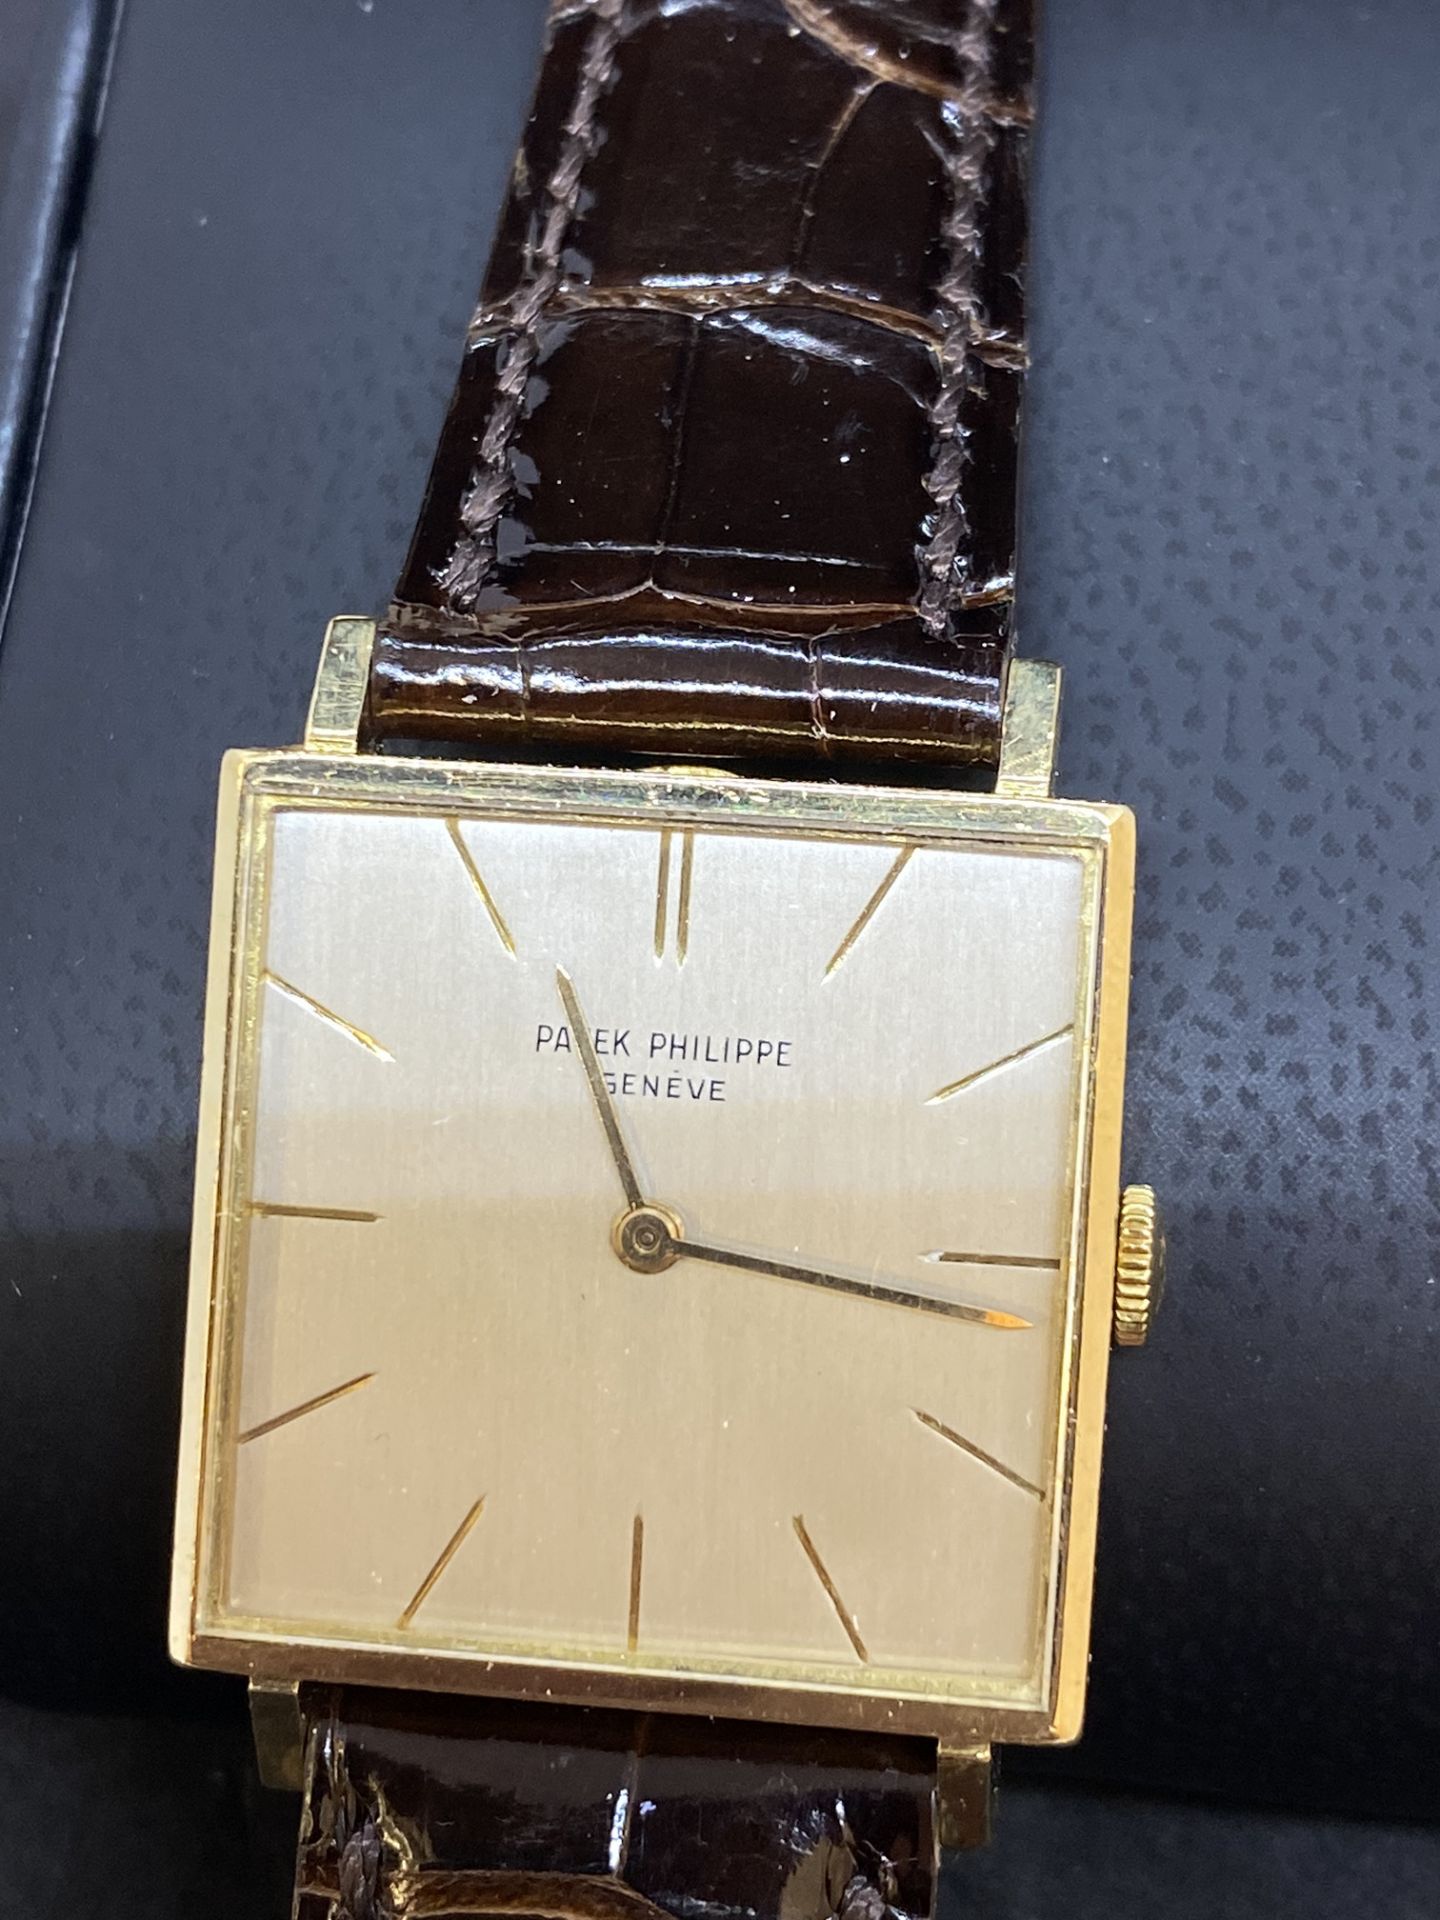 LOVELY VINTAGE 1963 PATEK PHILIPPE 18ct GOLD WATCH - Image 3 of 7